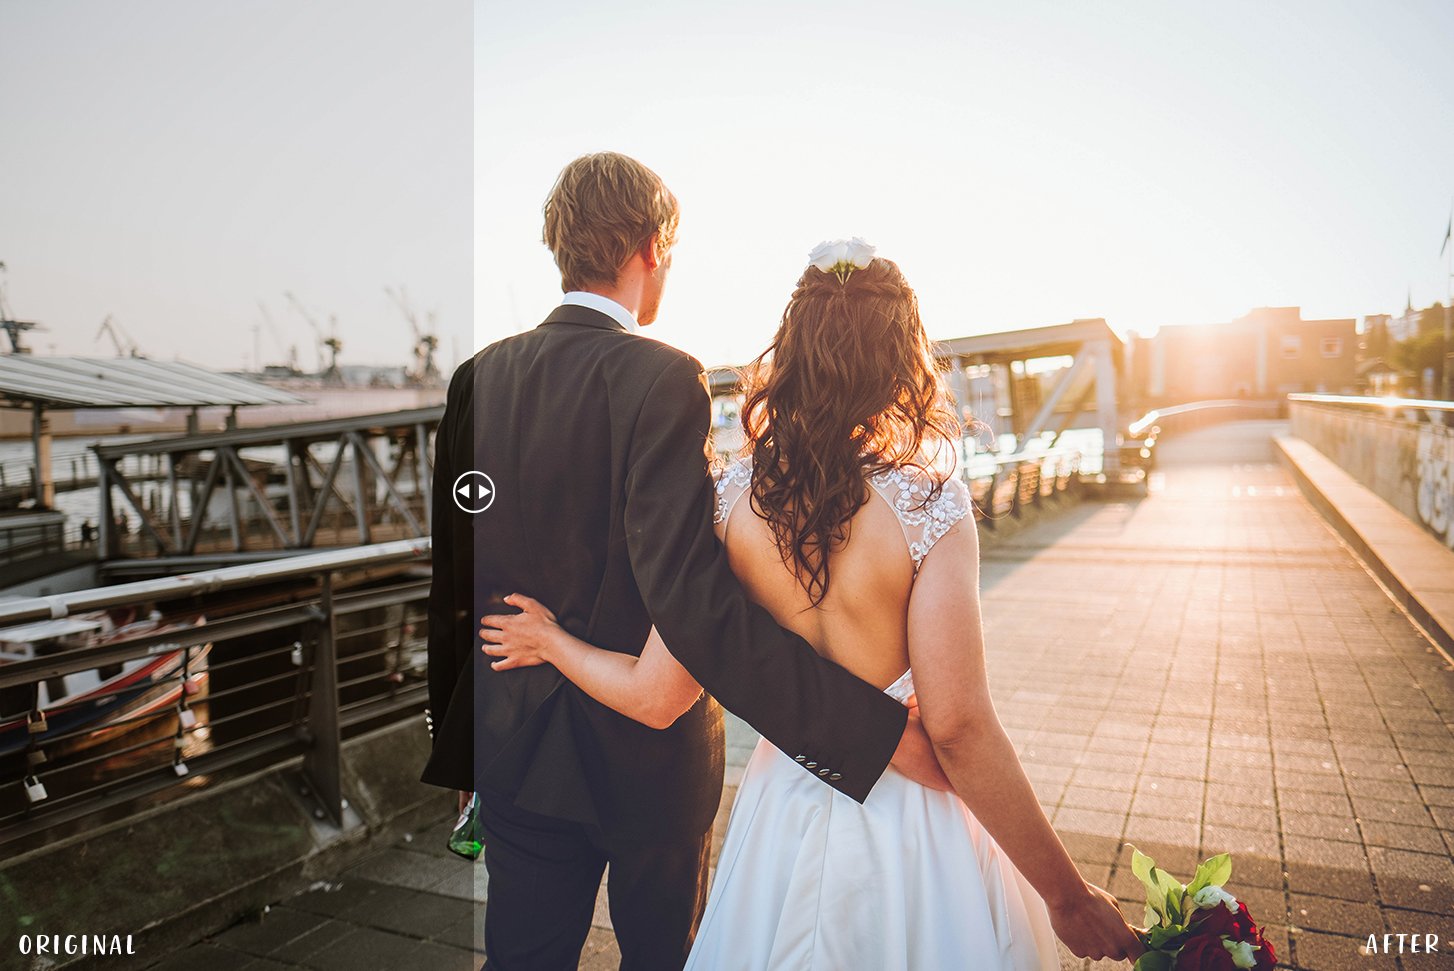 50 Pro Wedding Presets Collectionpreview image.